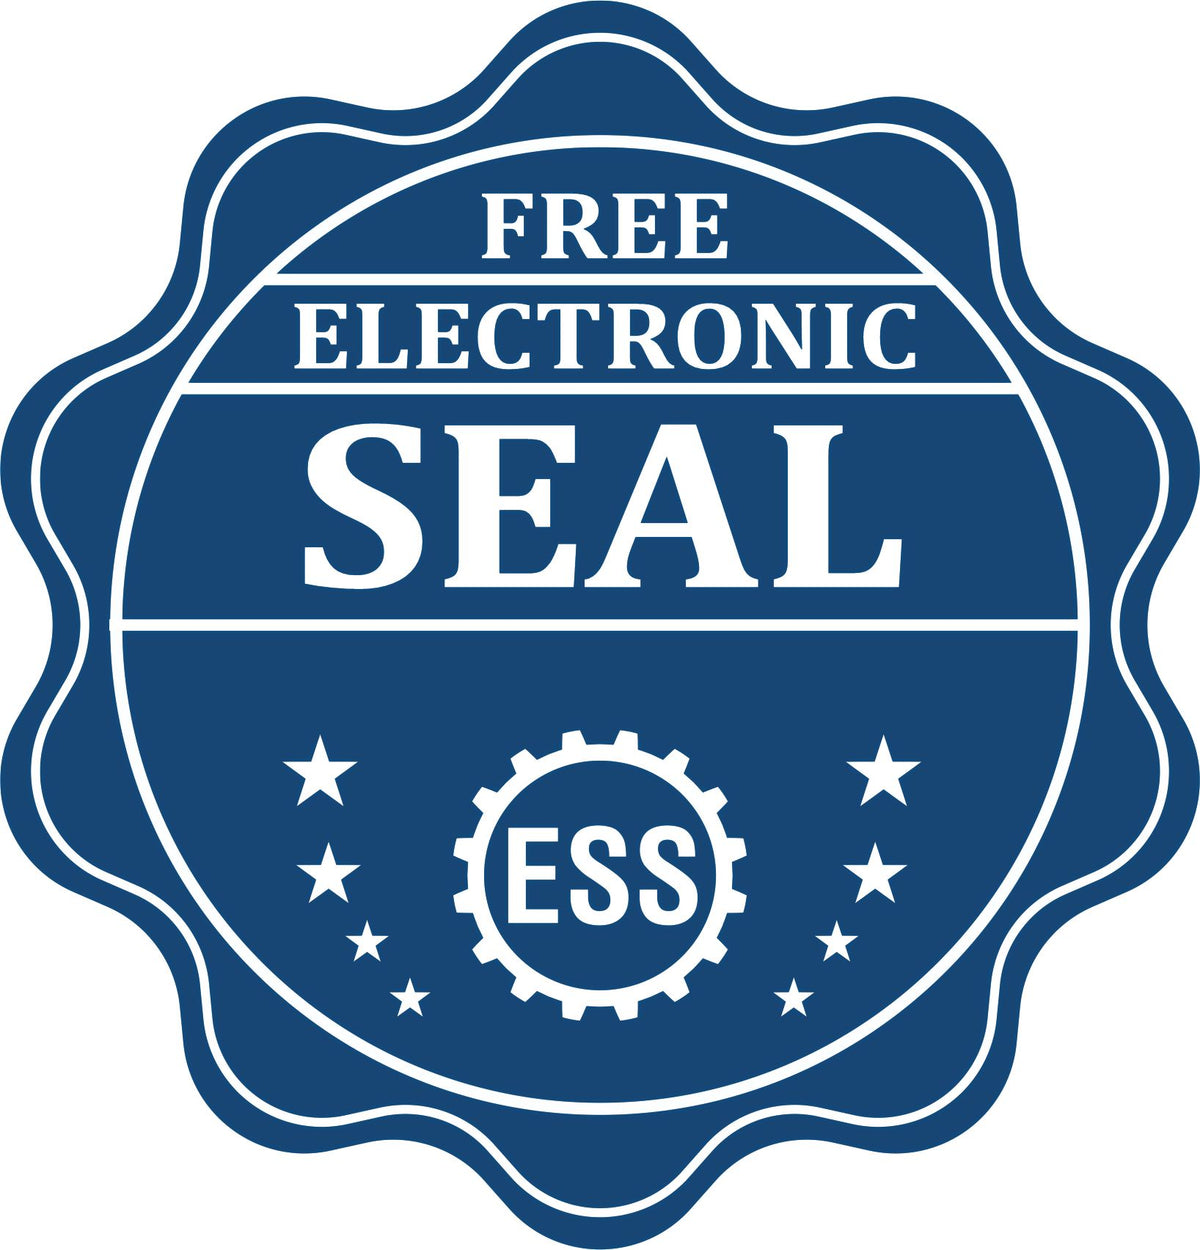 A badge showing a free electronic seal for the Hybrid Arkansas Engineer Seal with stars and the ESS gear on the emblem.